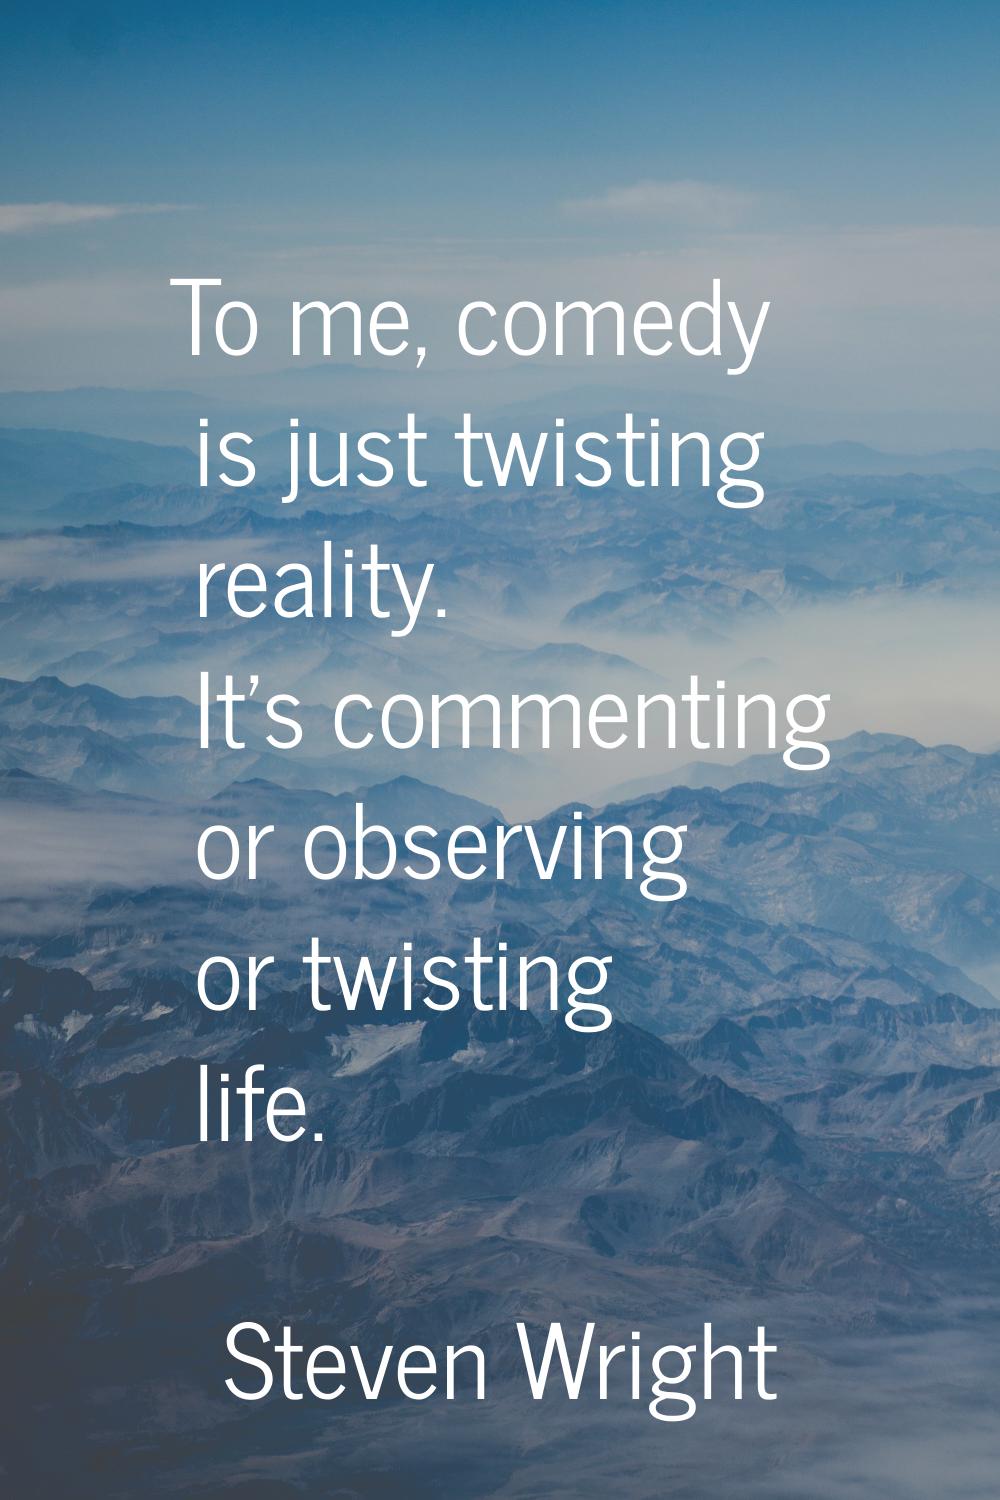 To me, comedy is just twisting reality. It's commenting or observing or twisting life.